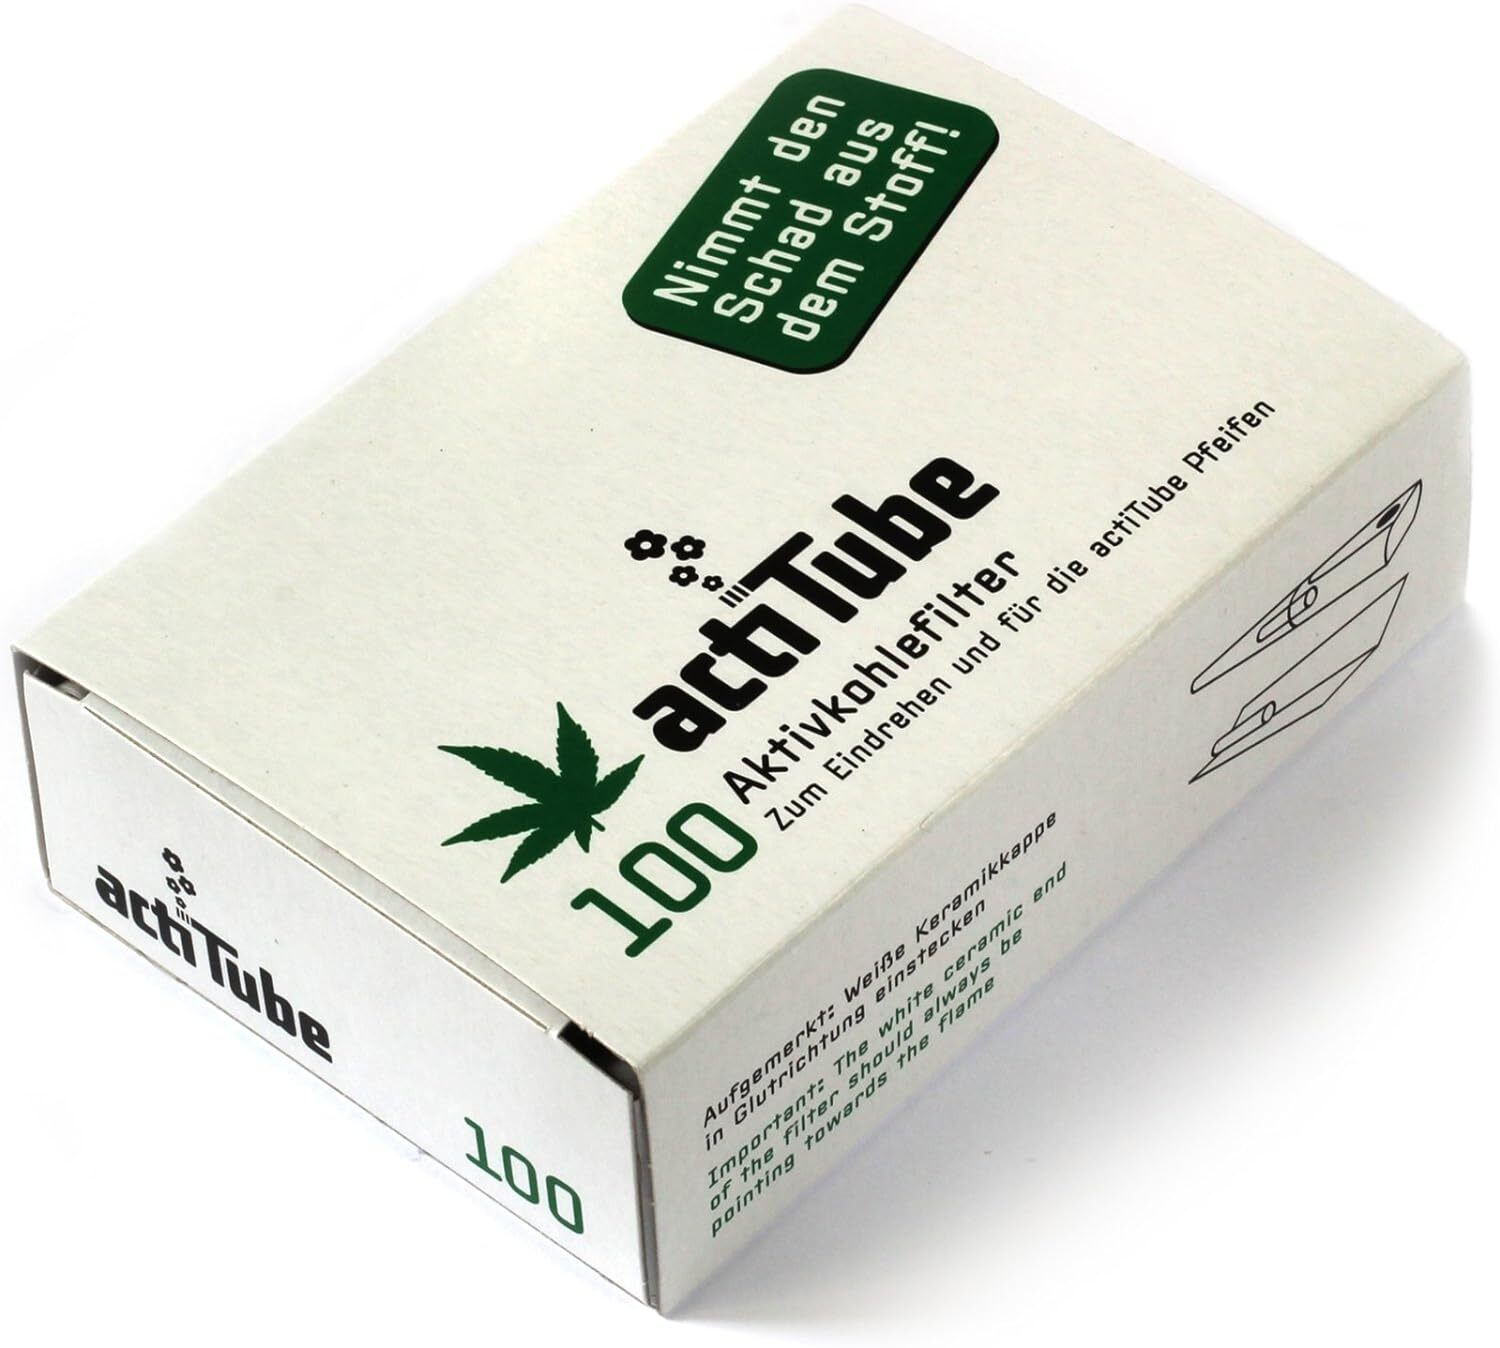 actiTube - Activated Charcoal Filters for Rolling 9mm - 1 Box = 100 Filters